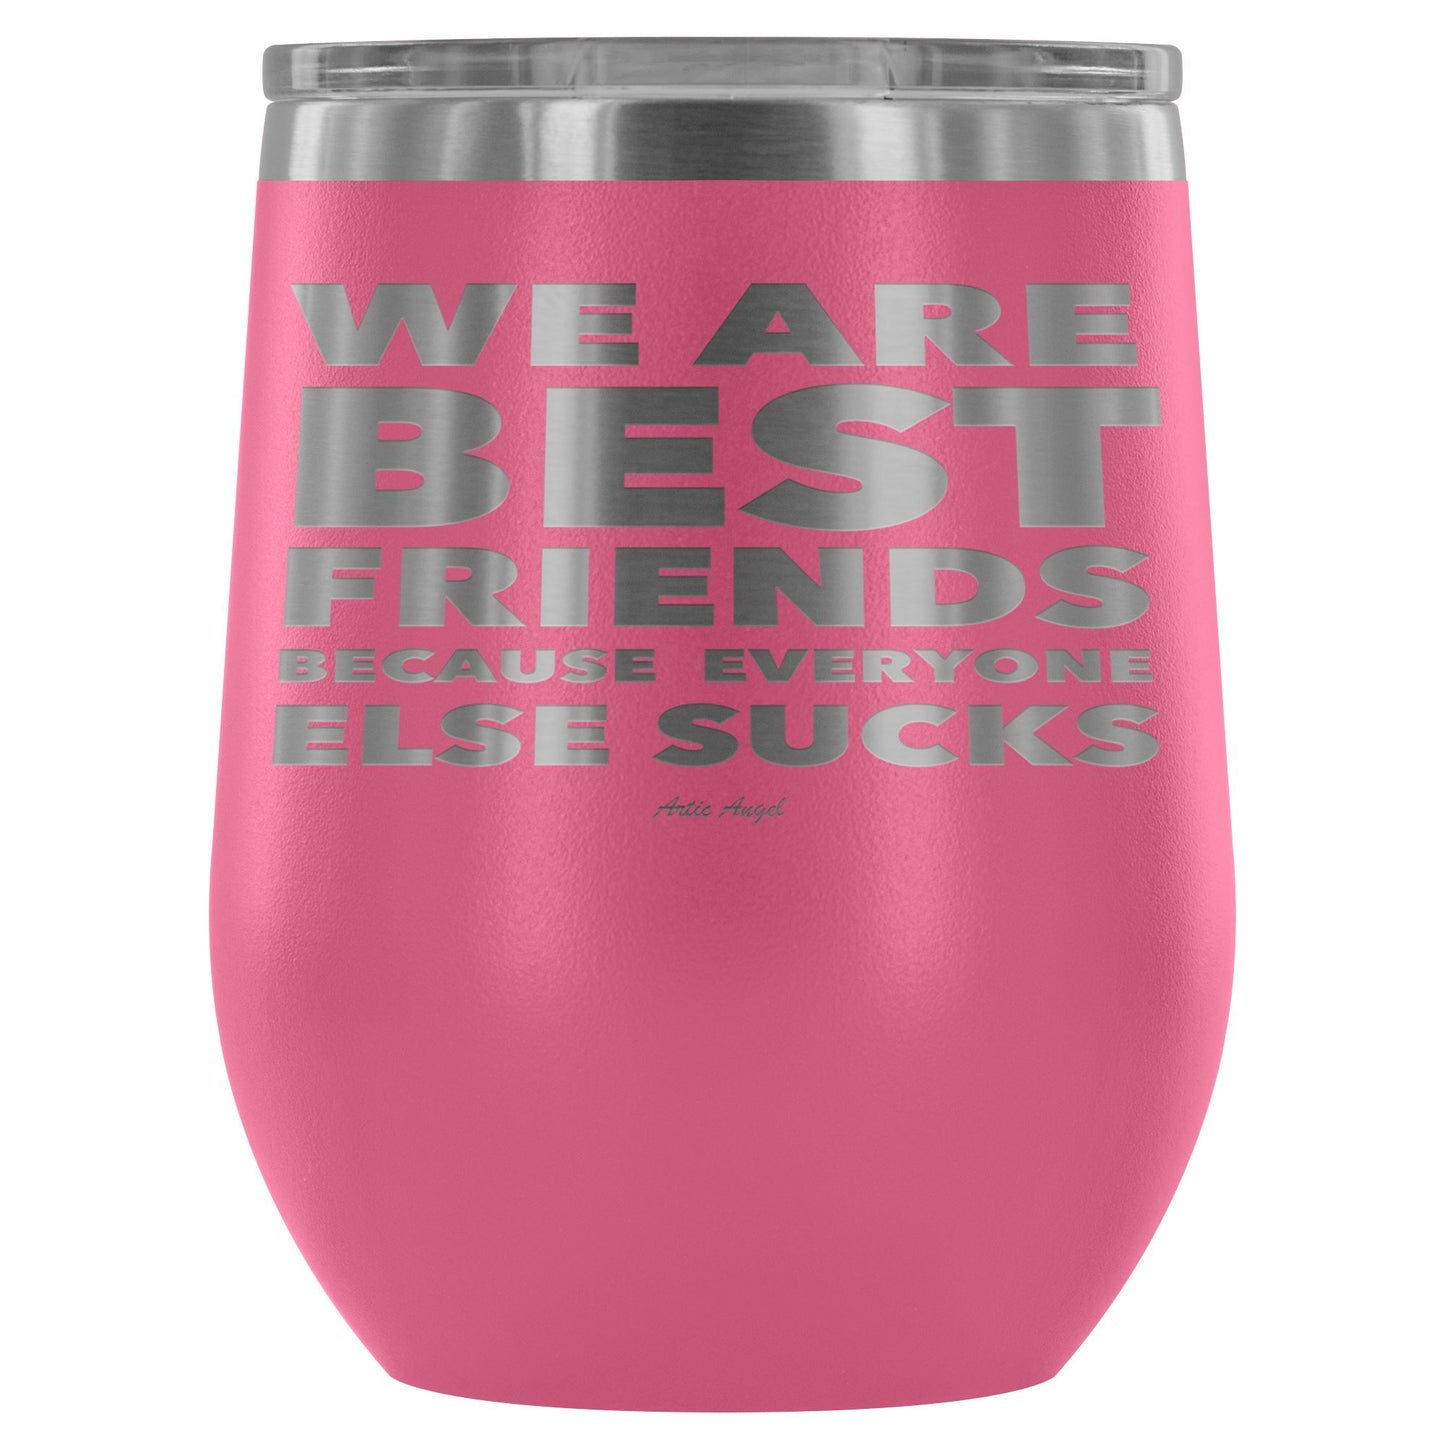 "We Are Best Friends Because Everyone Else Sucks" Stainless Steel Wine Cup Wine Tumbler Pink 